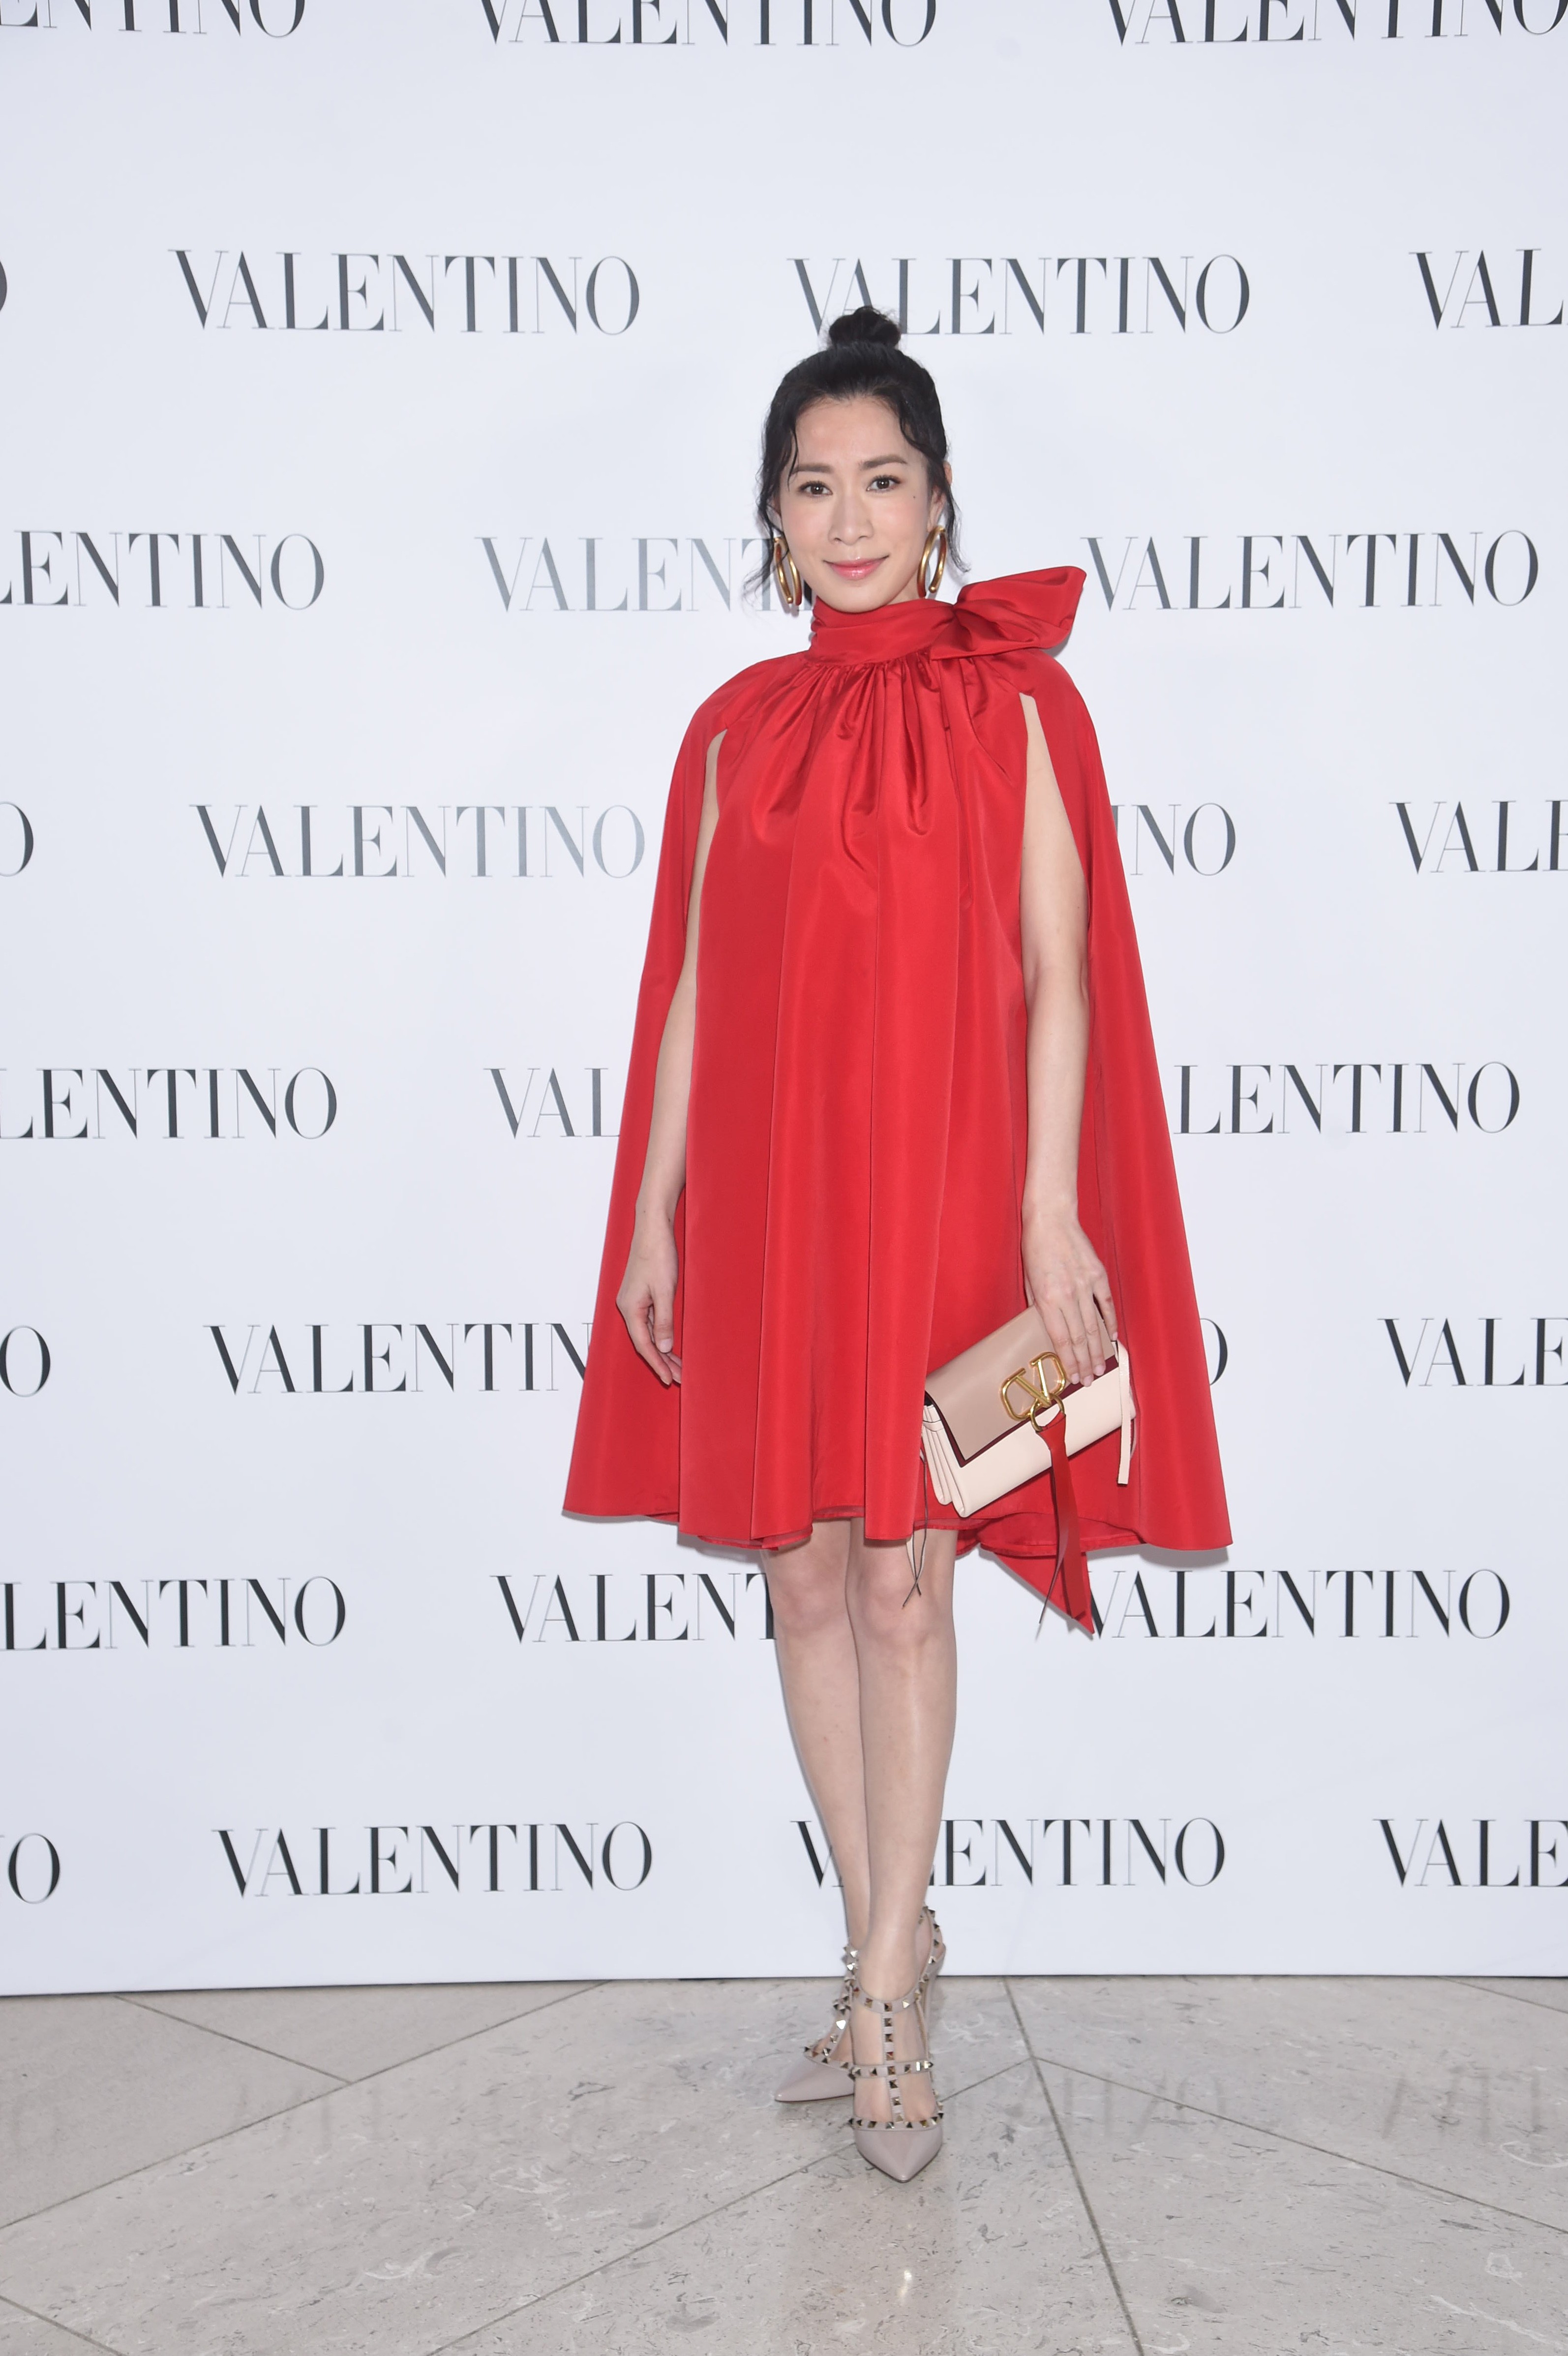 Gallery: Valentino's Vring cocktail party